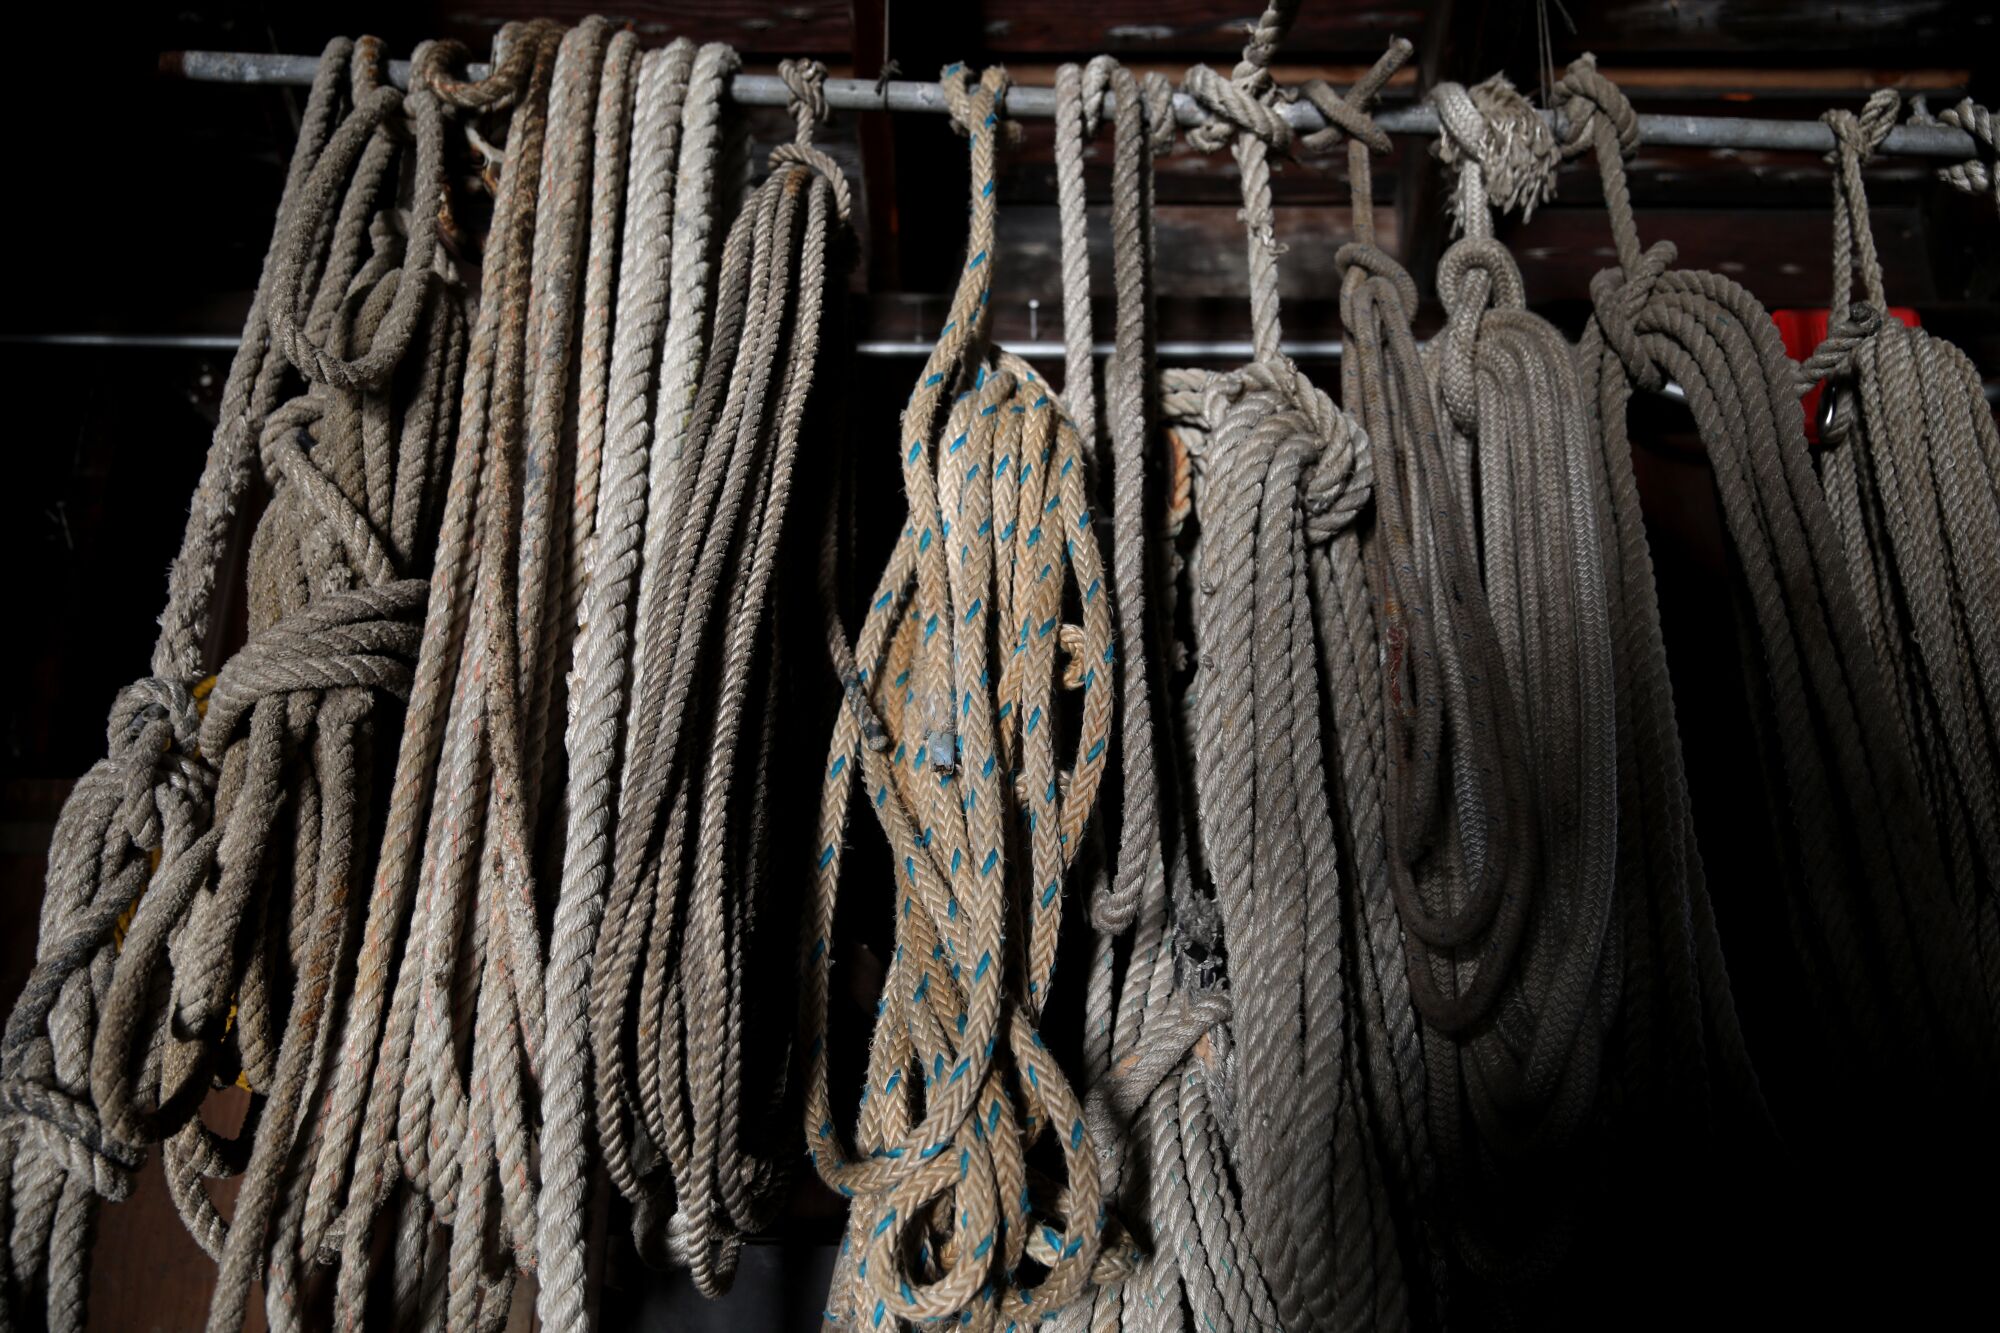 training ropes hang in the boat house on the campus.